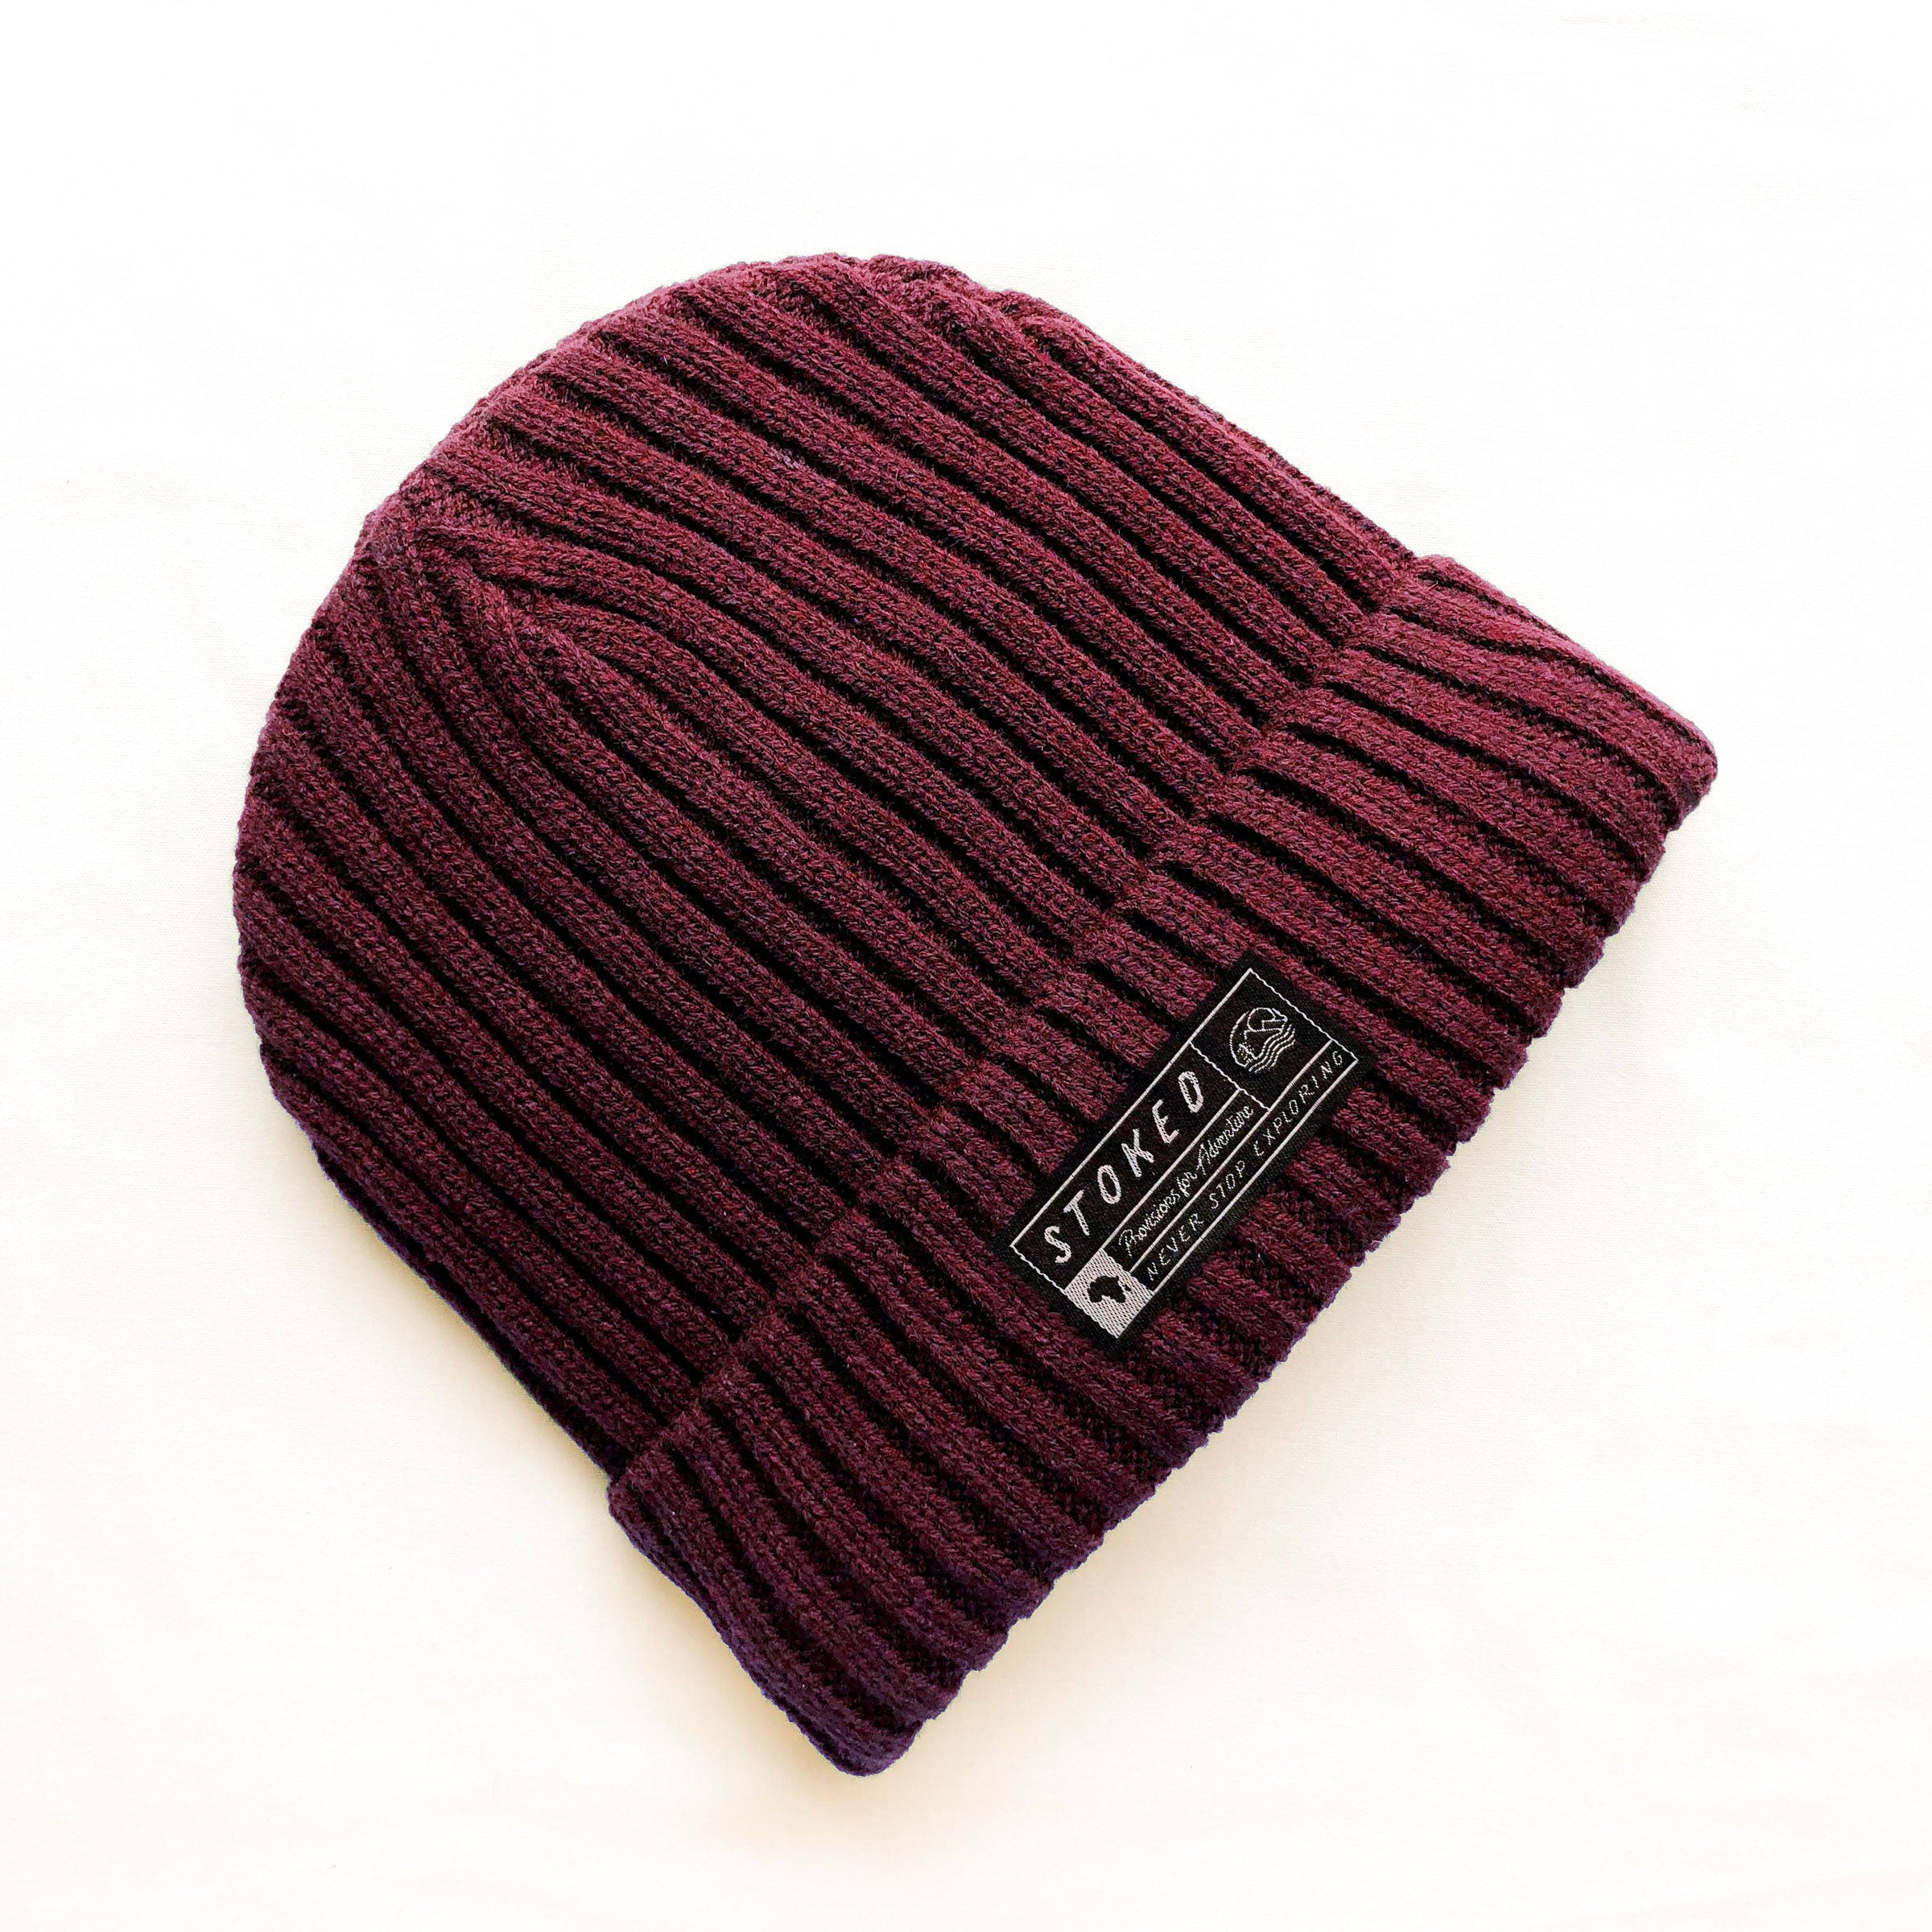 The Herold's Sunset Beanie - Stokedthebrand. Lifestyle products for outdoor adventures. Made in South Africa